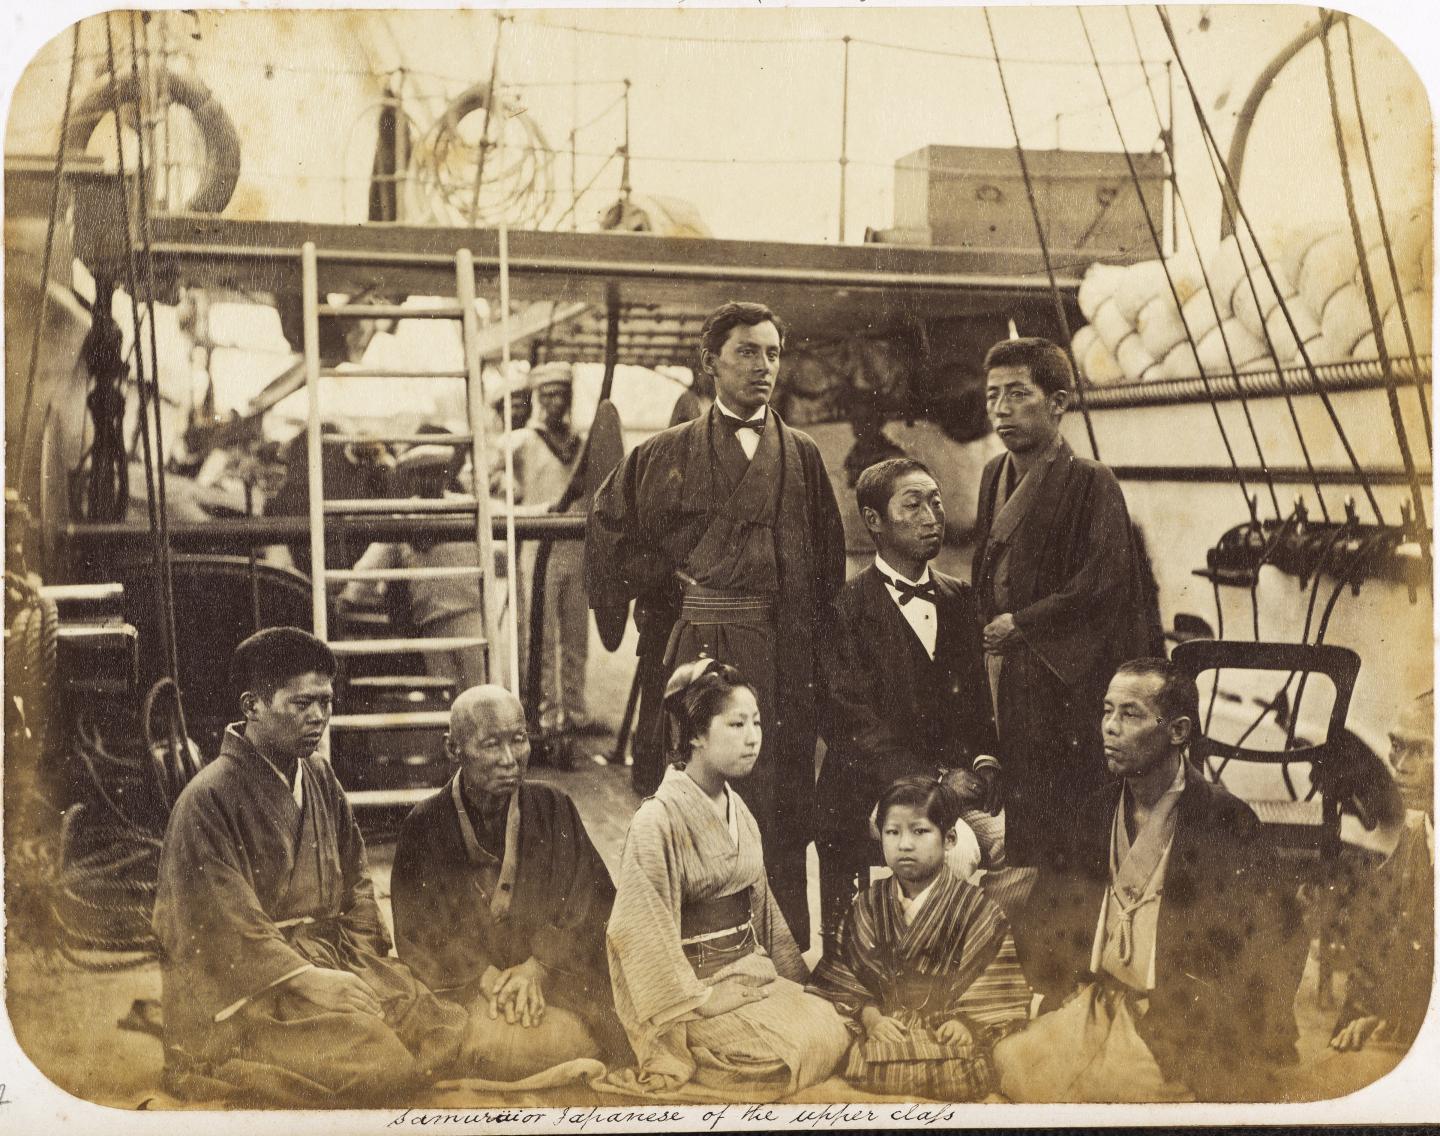 Historic photograph of a Japanese translator and possibly his family on board a ship